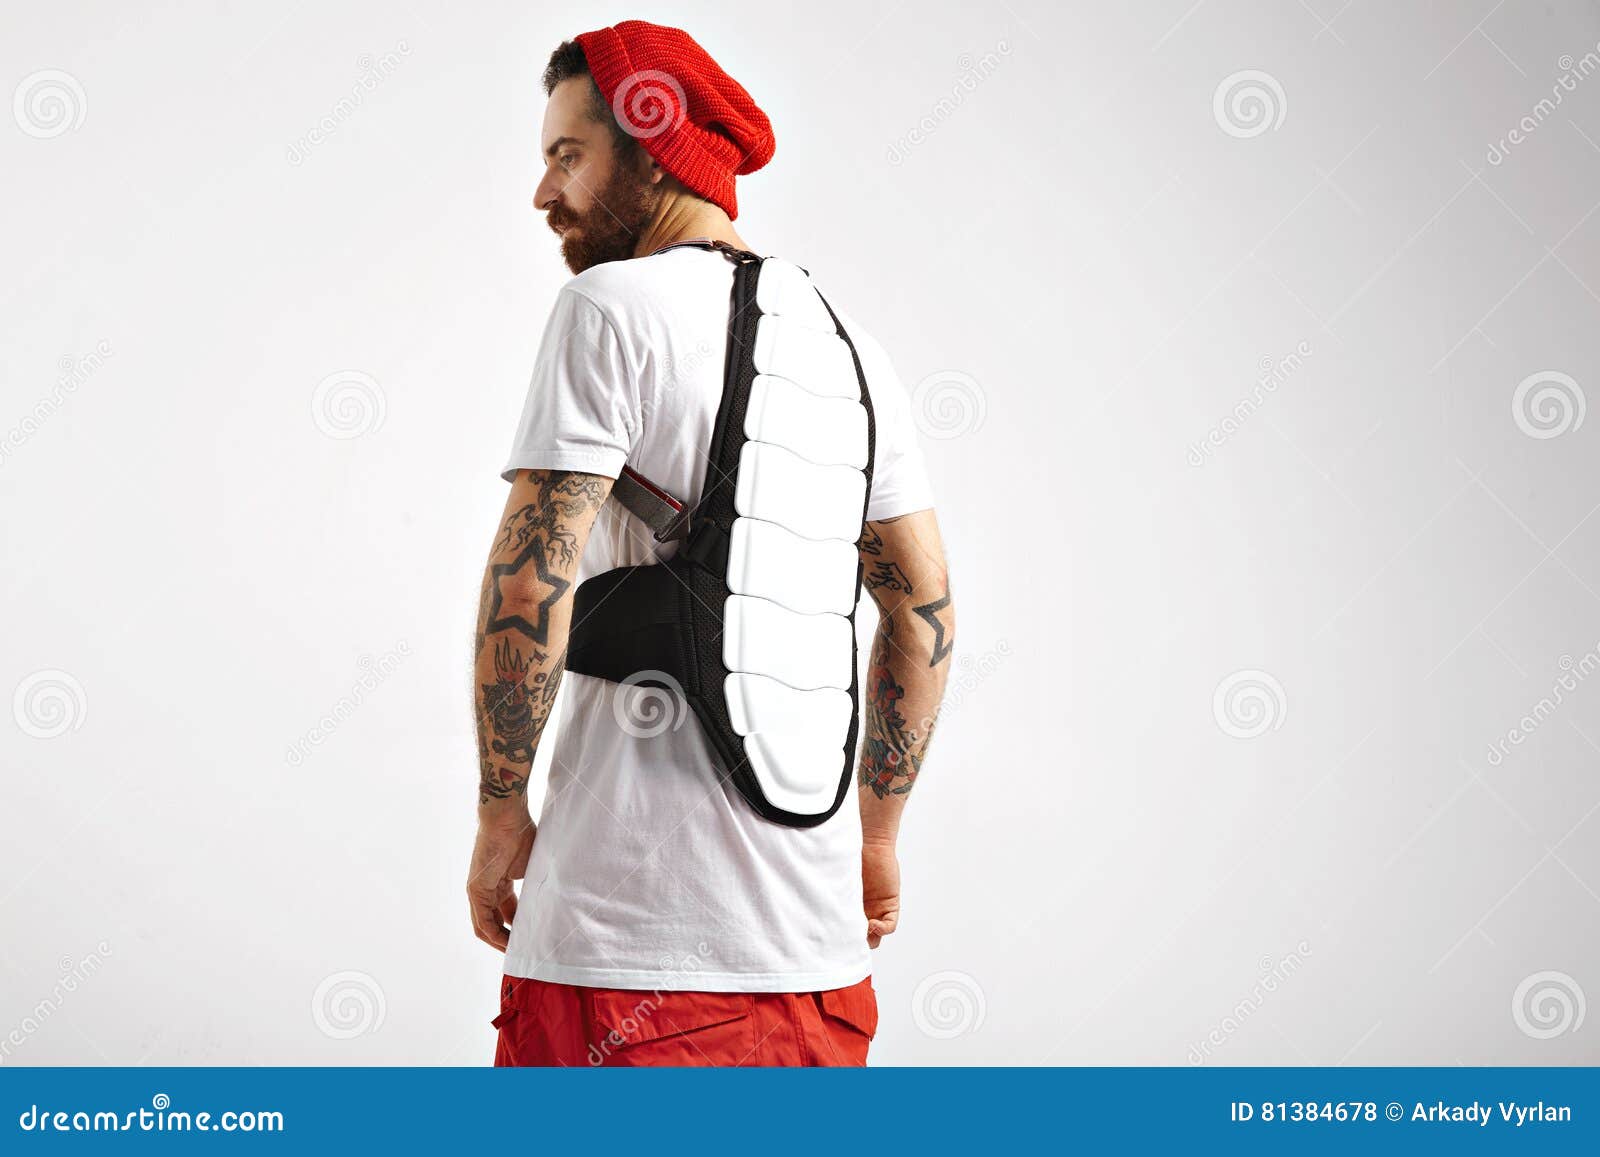 Snowboarder Wearing Back Protector Stock Photo - Image back, 81384678